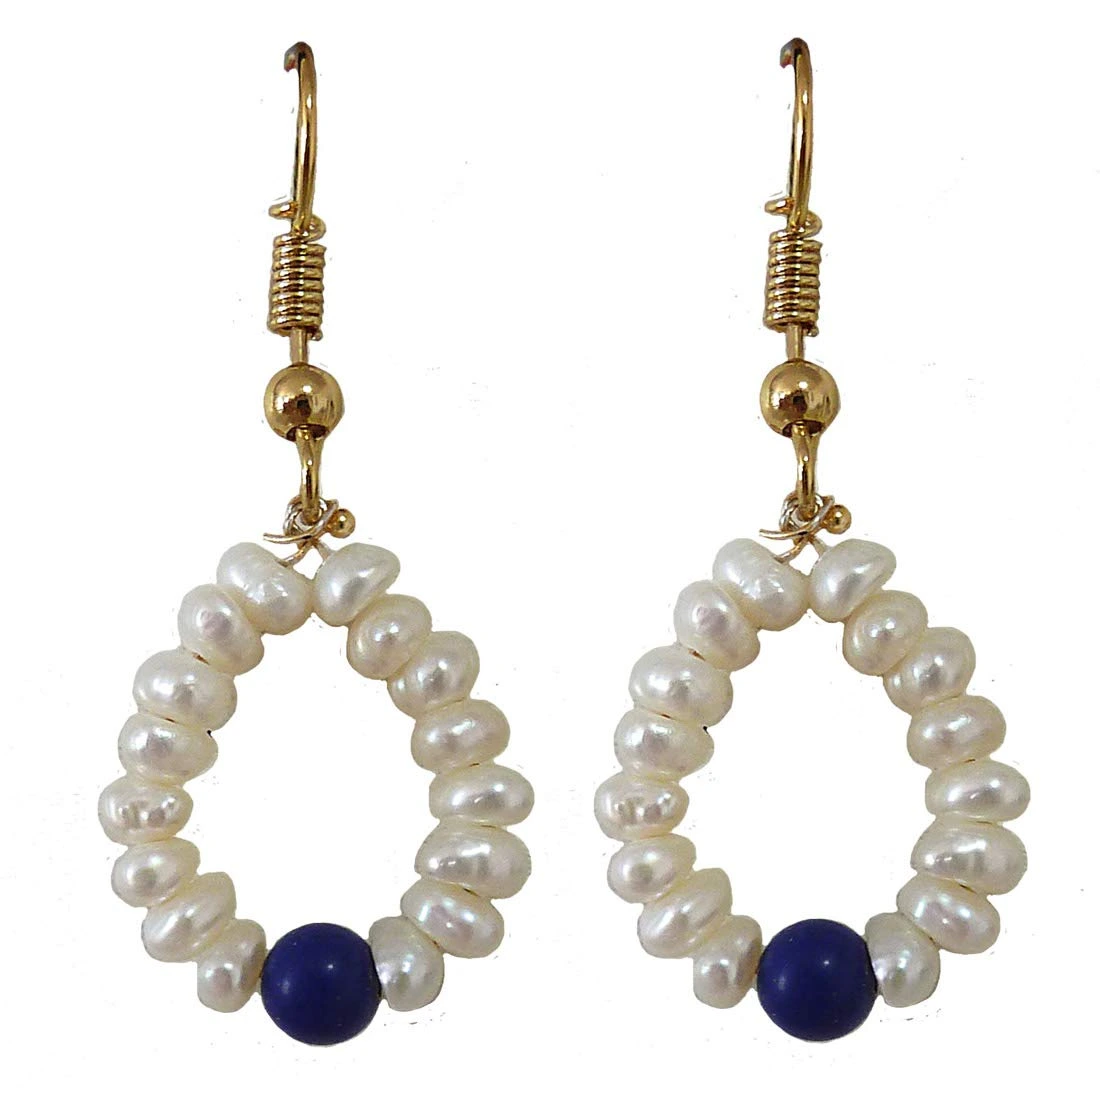 Dangling Circular Blue Lapiz Beads, Freshwater Pearl and Gold Plated Wire Style Earrings(SE382)